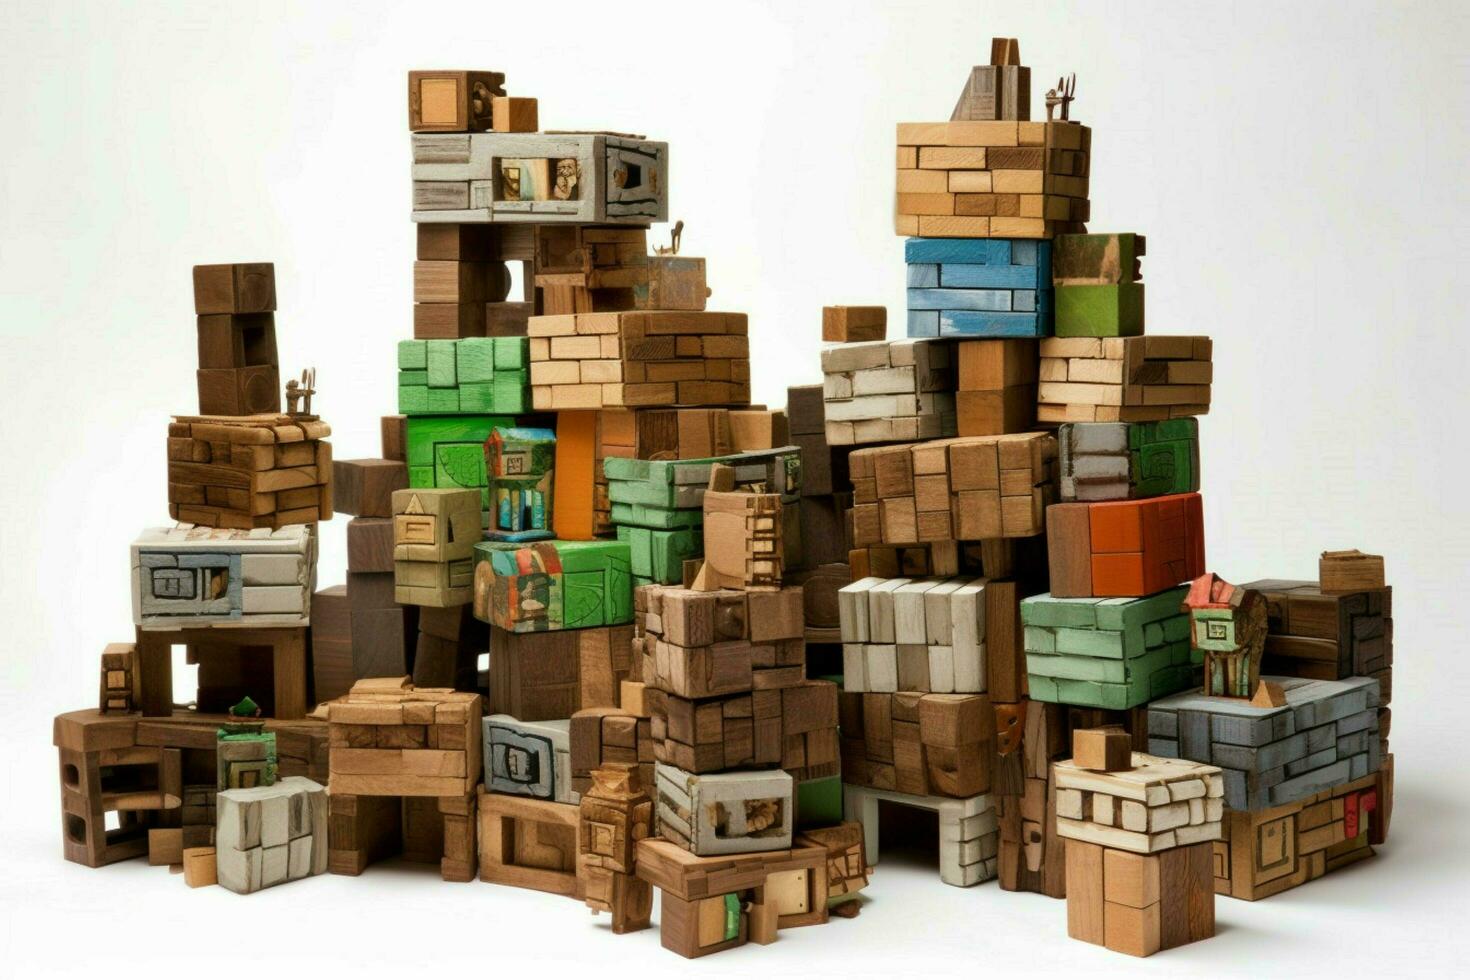 A set of building blocks made from recycled materia photo